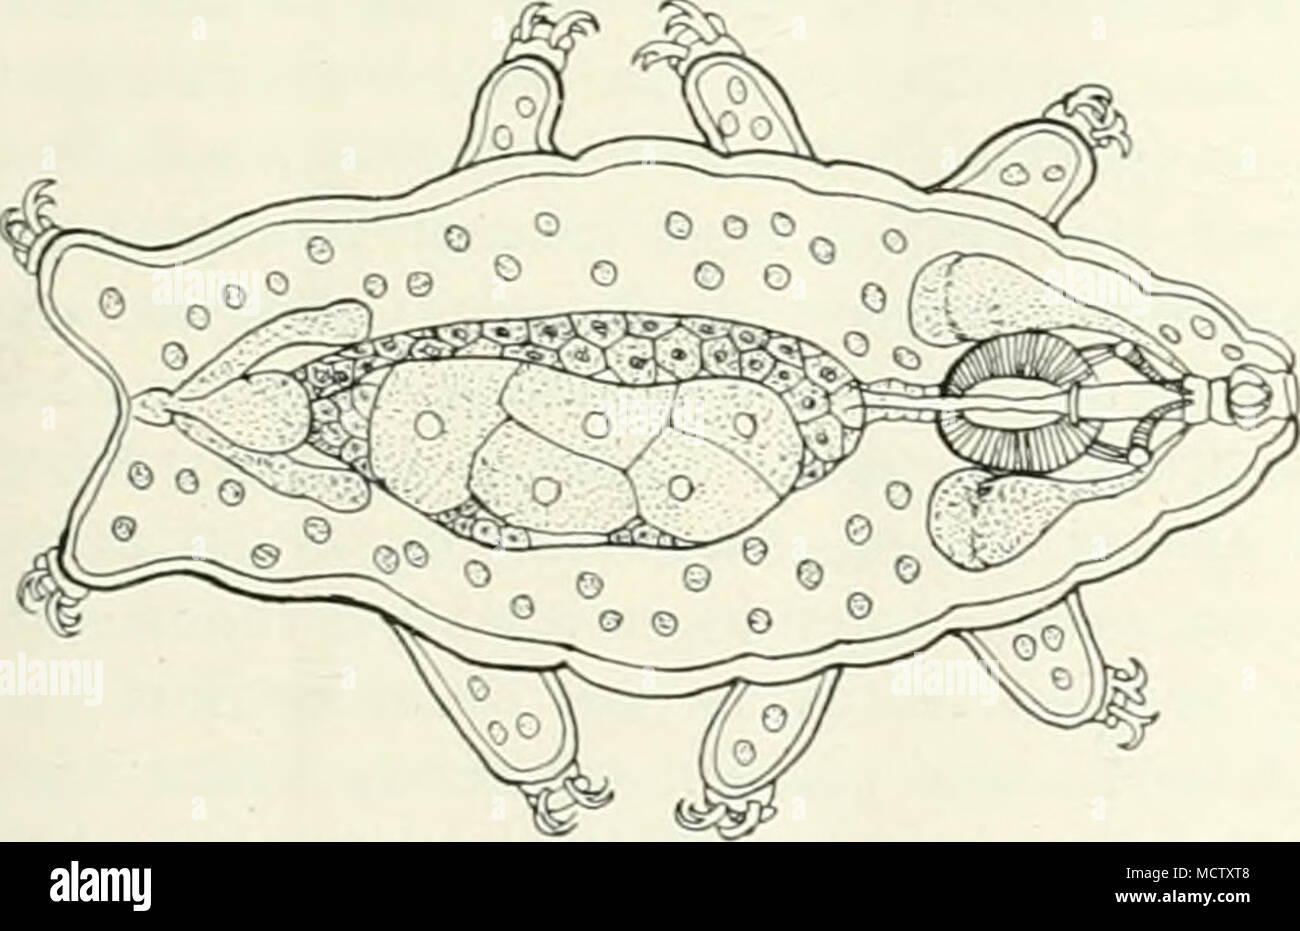 . Fig. 2.—a tardigr.de, showing internal org.ns. in such a Manner as to bring its Food to it. But sometimes it will remain a long While in the Maggot Form and not shew its Wheels at all.&quot; Still another group of animals very wideh&quot; distributed are the threadworms or Nem.^todes. Some of these live freely in the earth or water, but a great number of them are parasitic or live inside the bodies of other animals or plants. Amongst the parasites of the latter is the threadworm which causes the ear-cockles in corn. These cockles are brown or purple galls or tumours which replace the grain Stock Photo